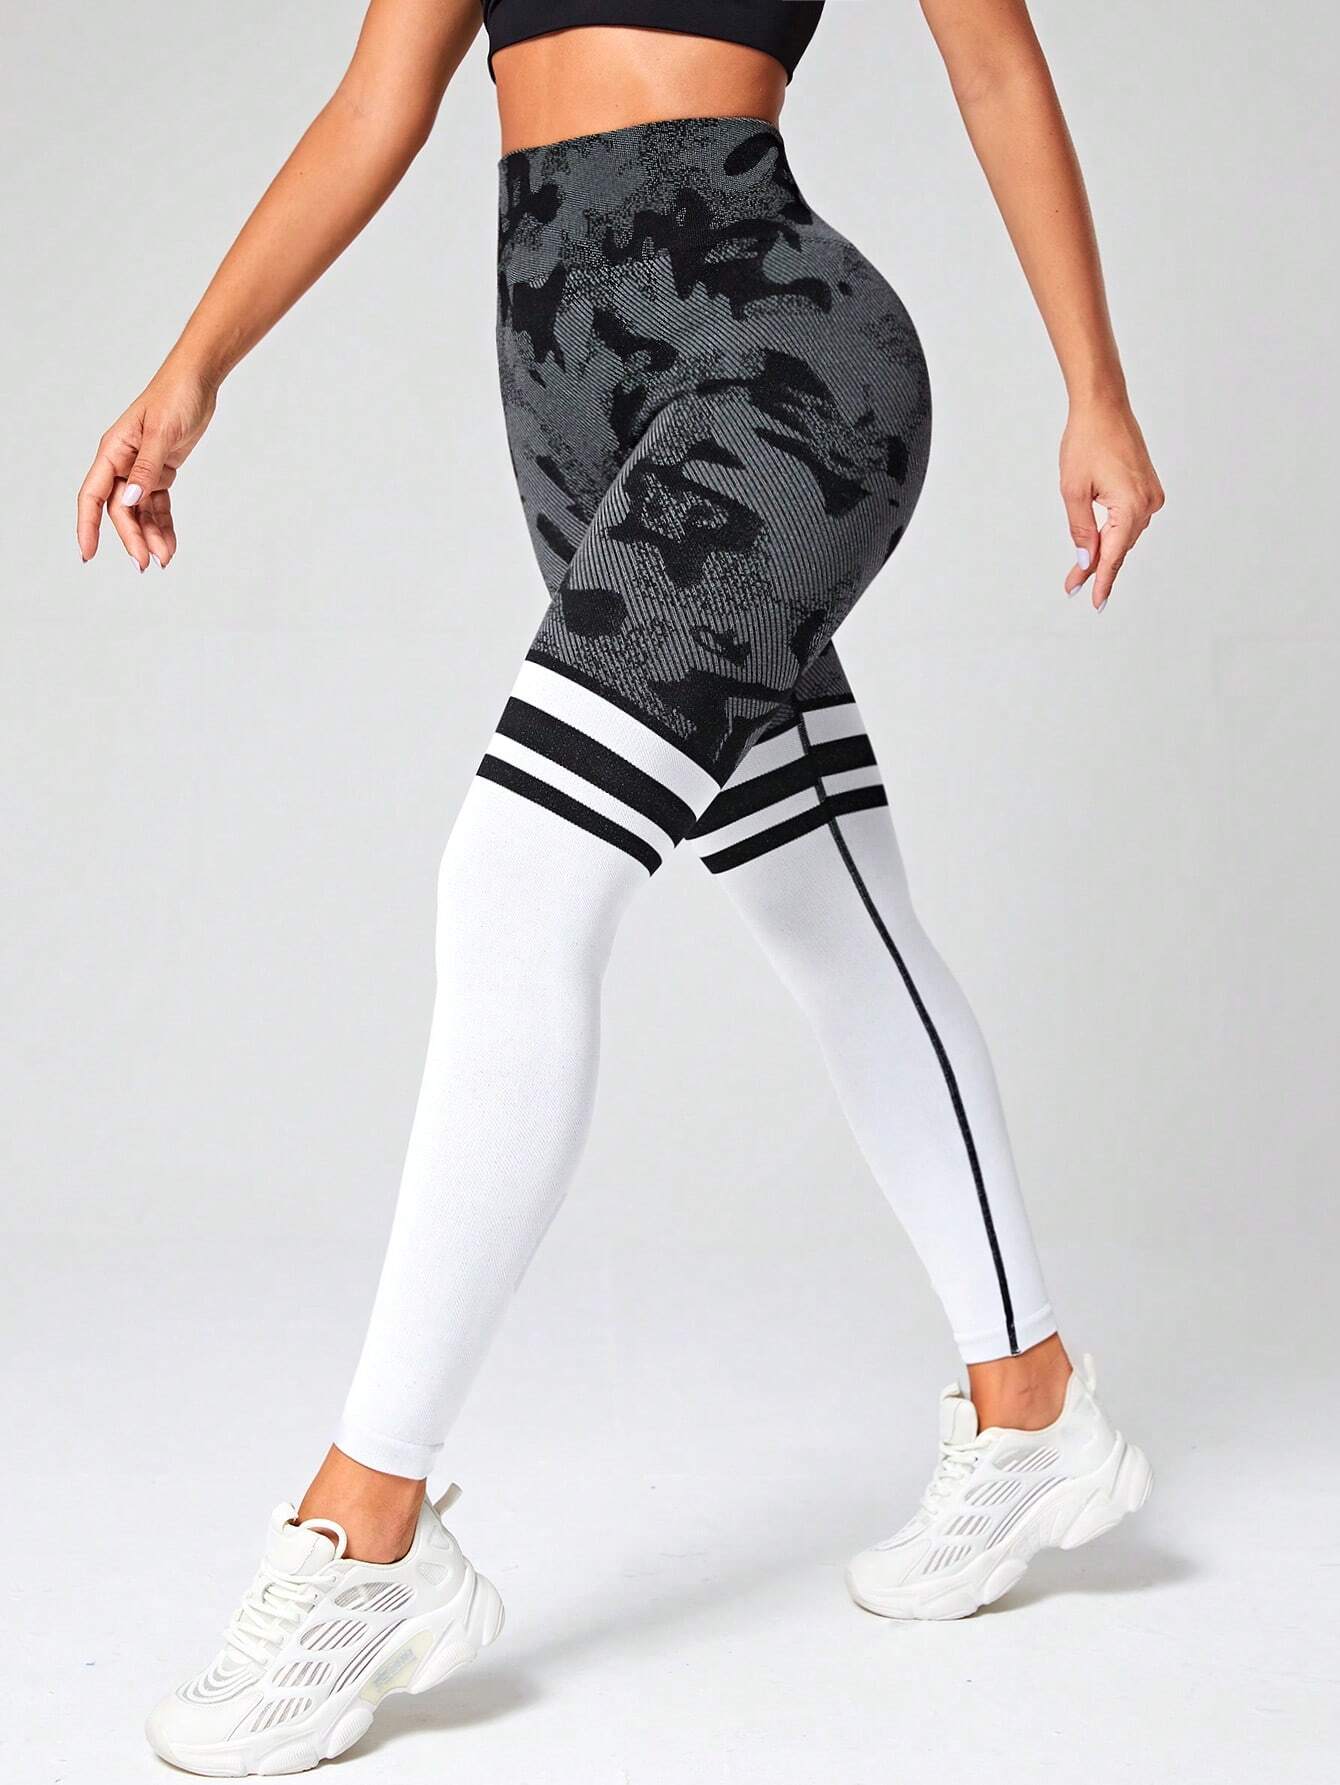 High Waisted Seamless Gym Leggings For Women 2021 Camoflauge Camouflage  Yoga Pants With Scrunch Butt XS Sportswear H1221 From Mengyang10, $11.44 |  DHgate.Com